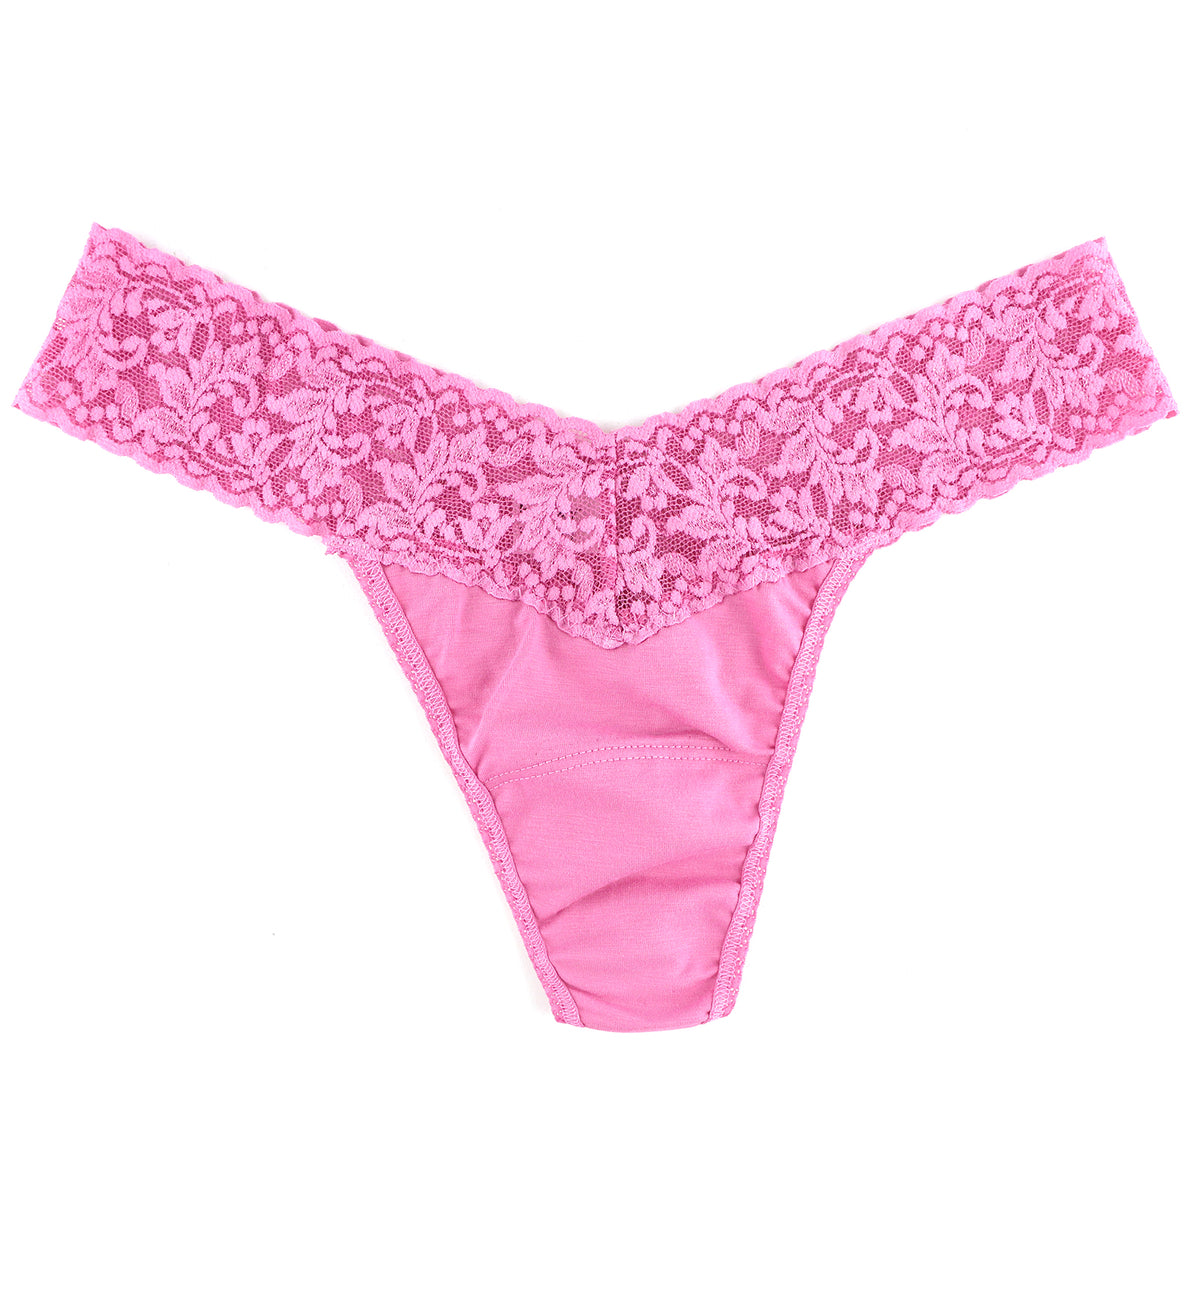 Hanky Panky Cotton Low Rise Thong (891581),Chateau Rose - Chateau Rose,One Size